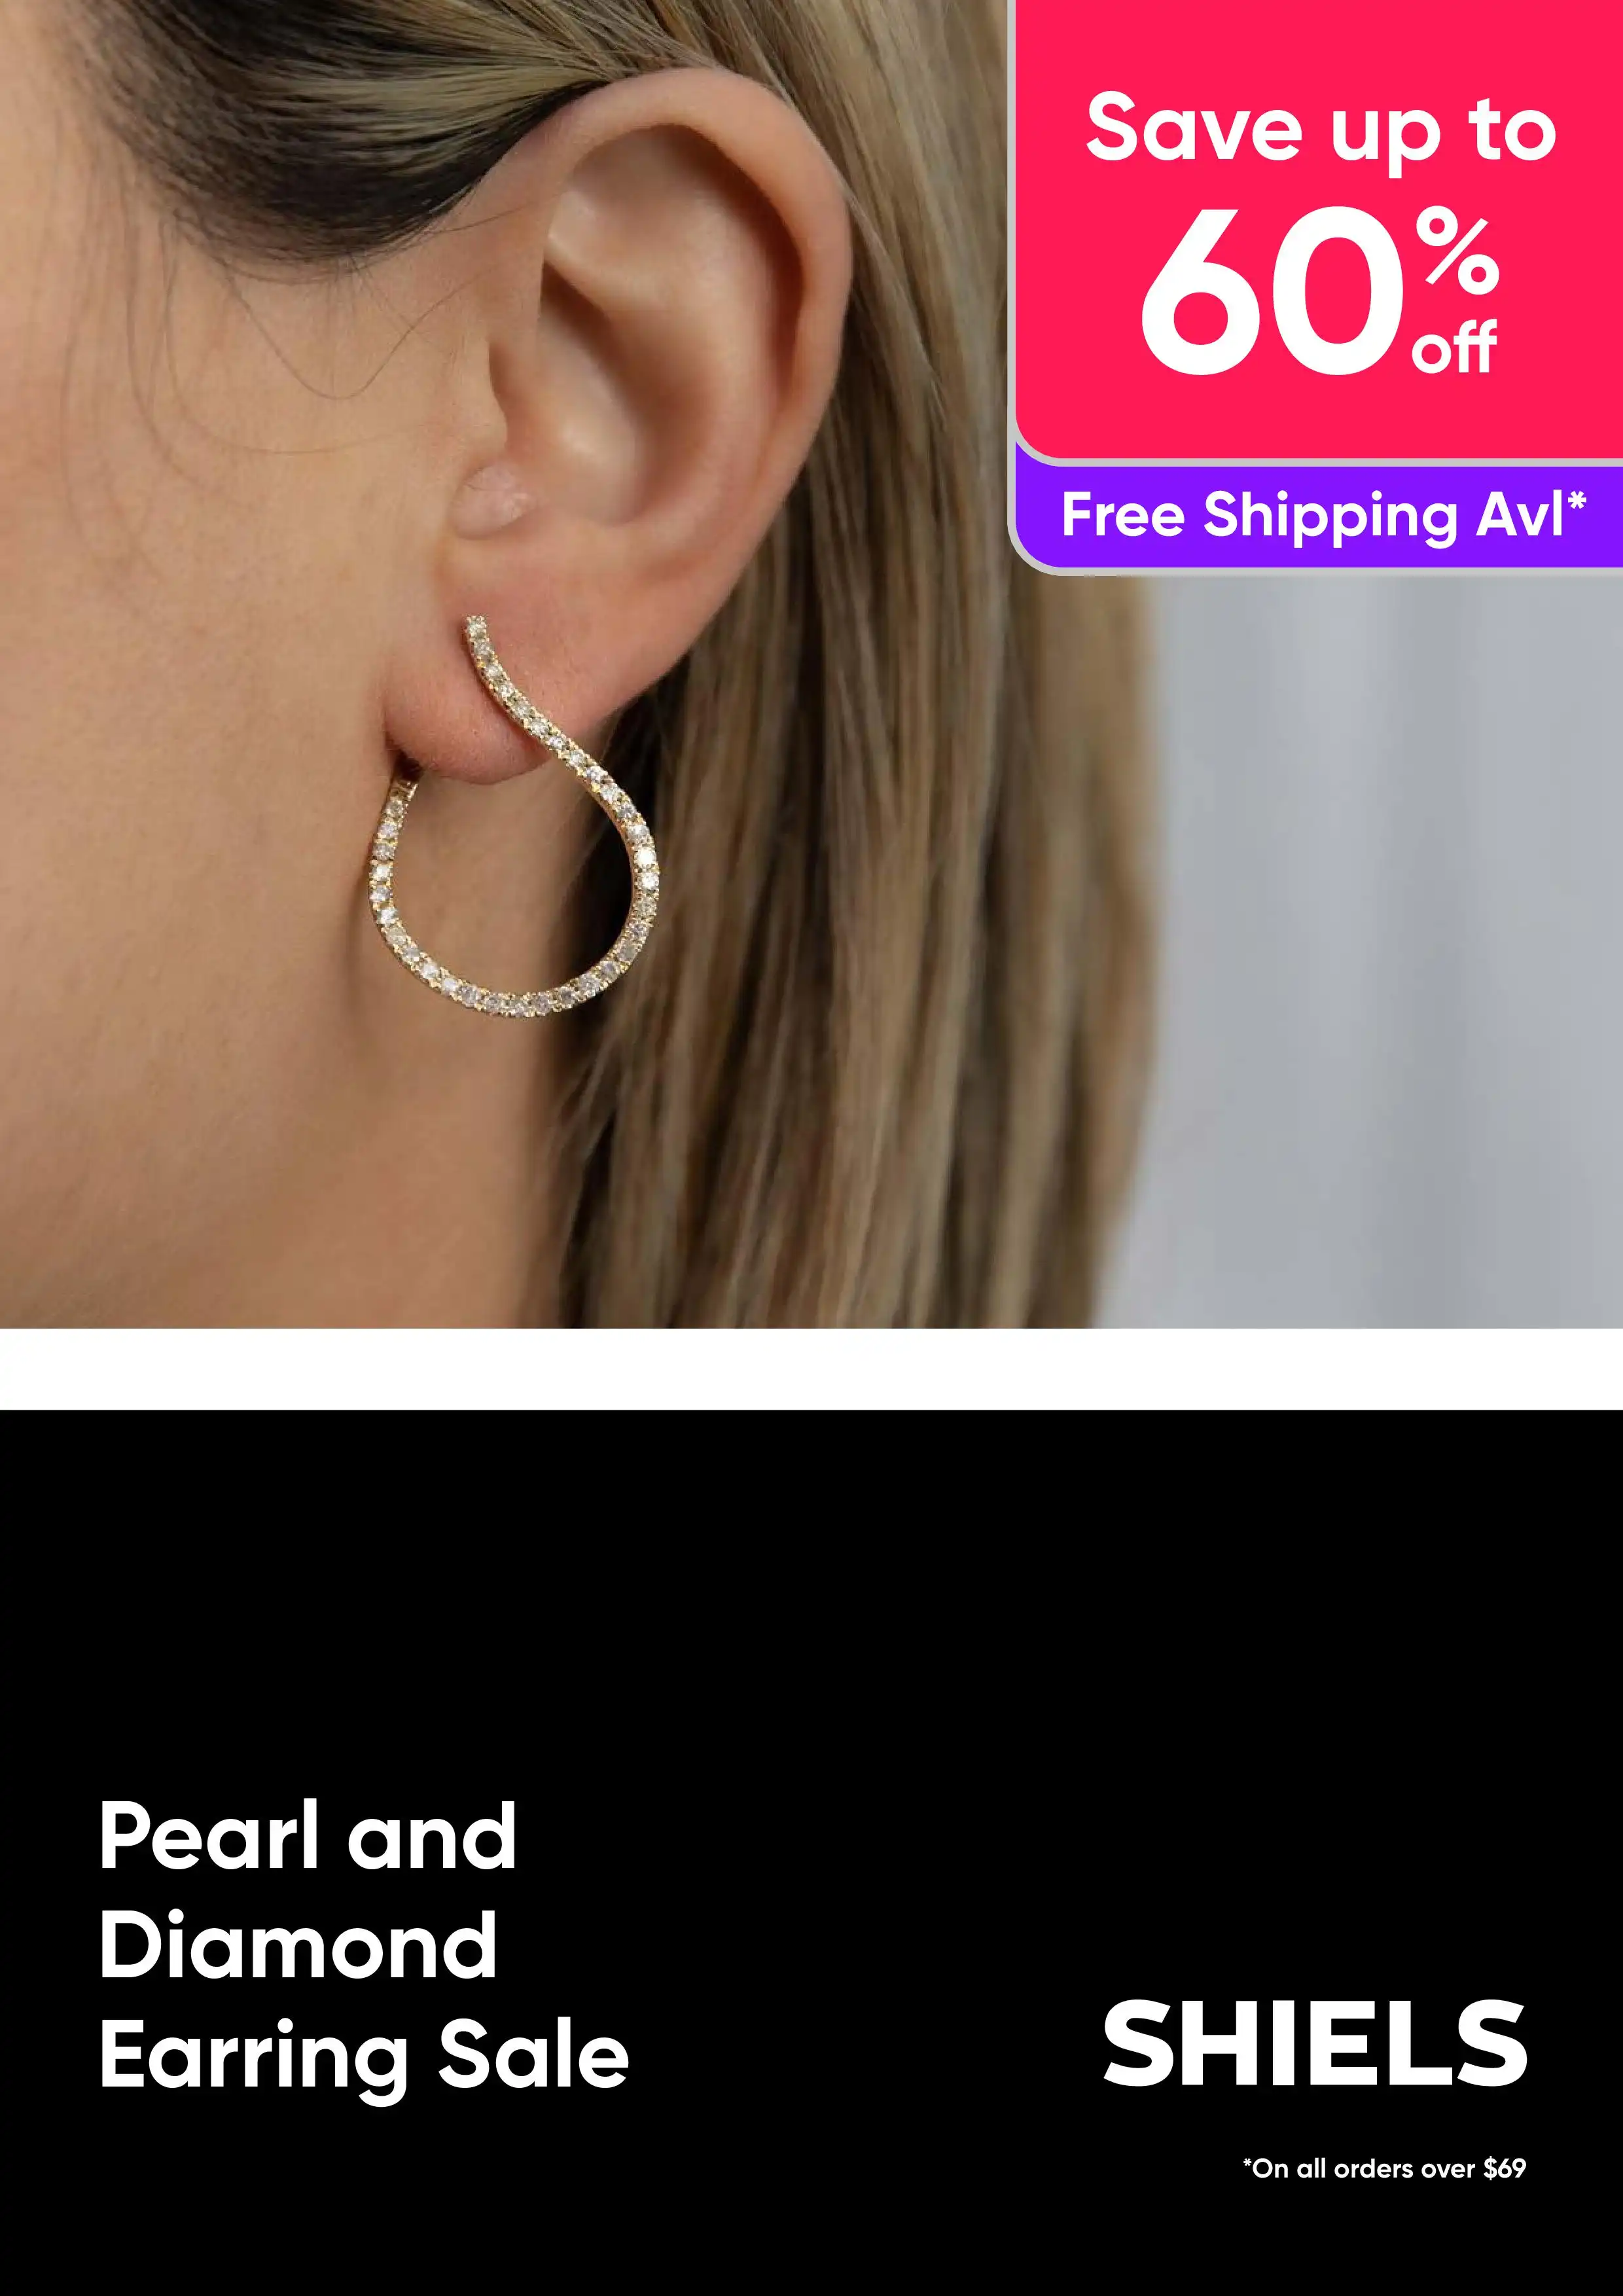 Earrings - Pearls, Diamonds - Up to 60% Off